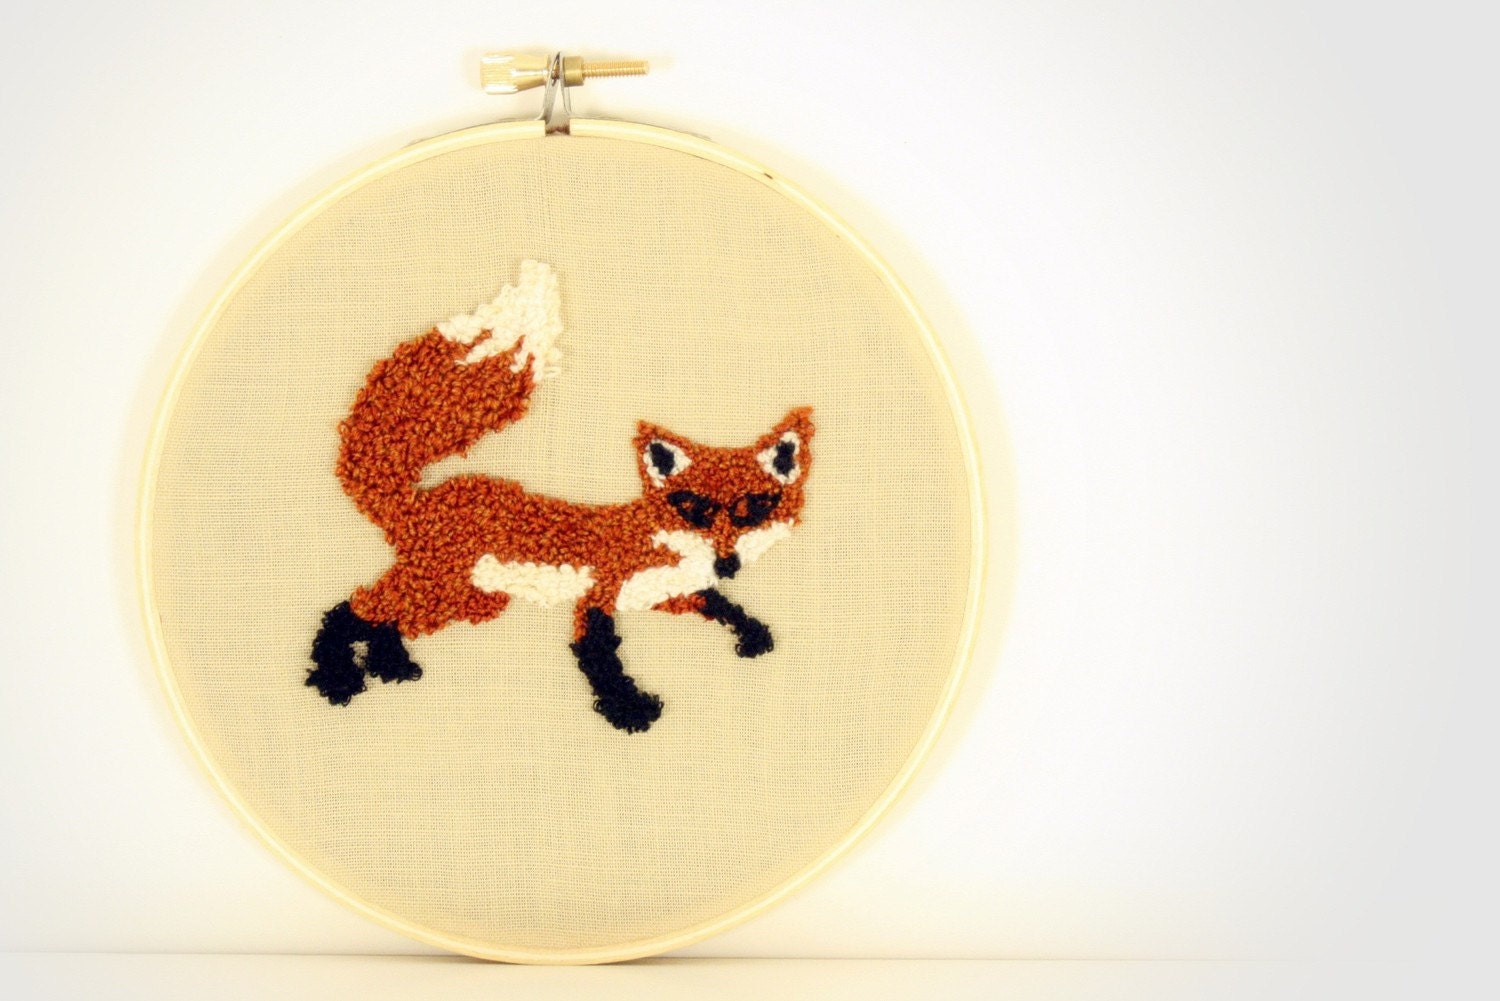 Fox Punch Needle Embroidery Wall Hanging 5 inch hoop by erinf115 on Etsy